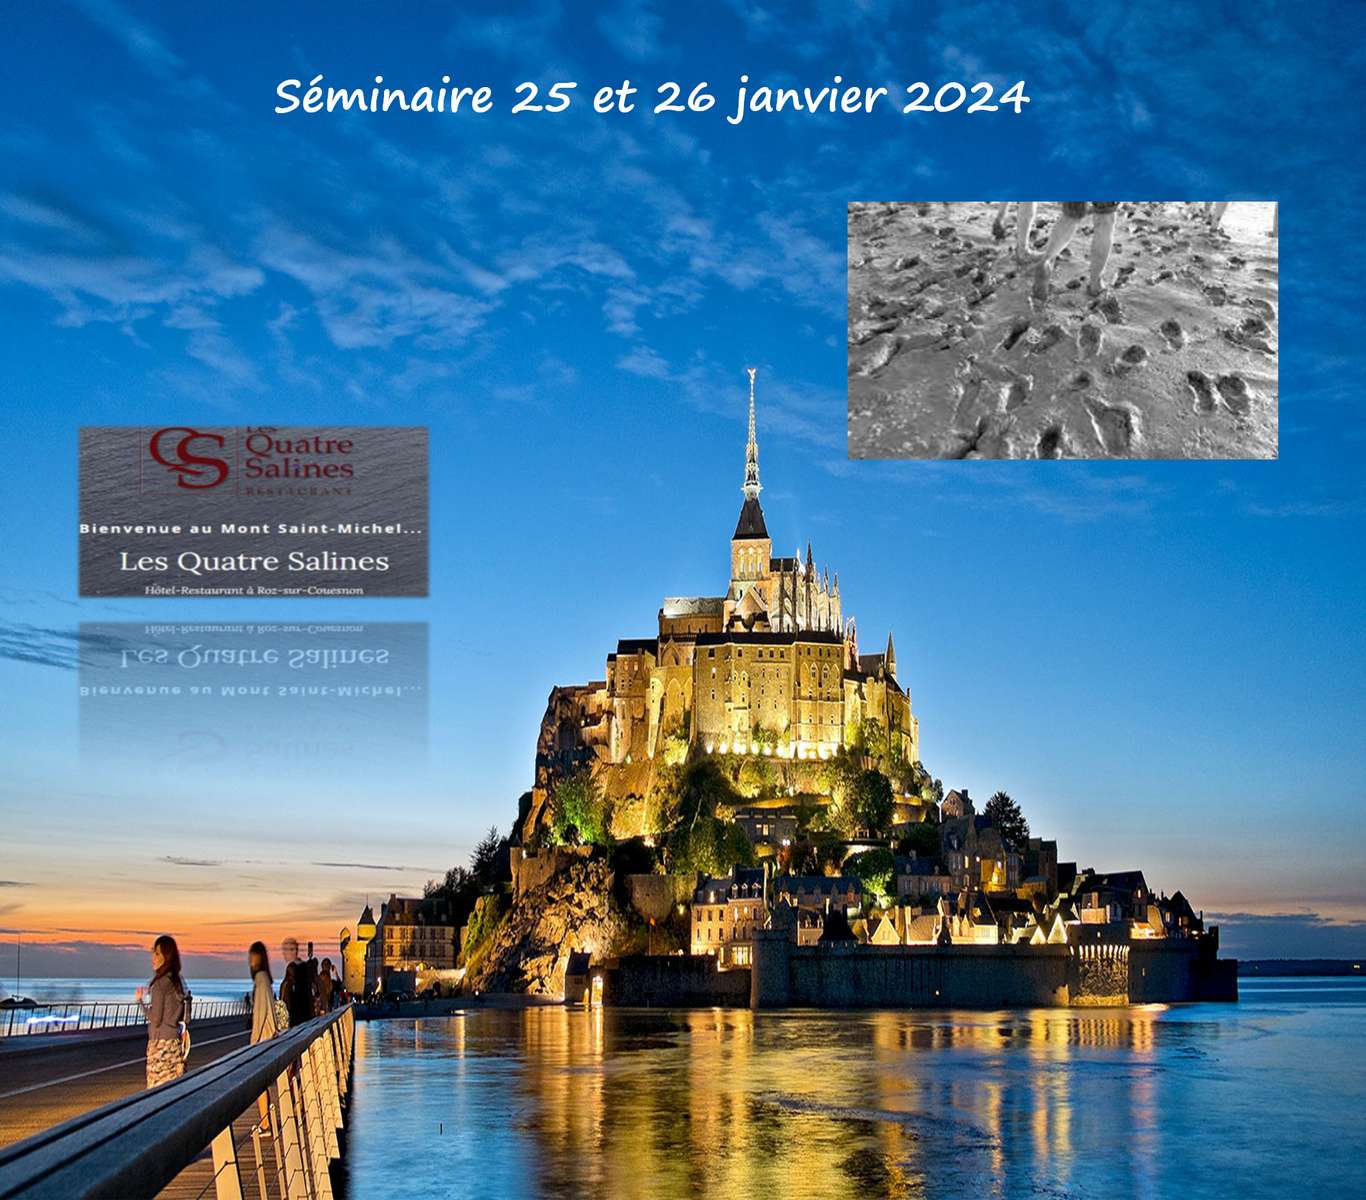 seminar January 25 and 26, 2024 online puzzle